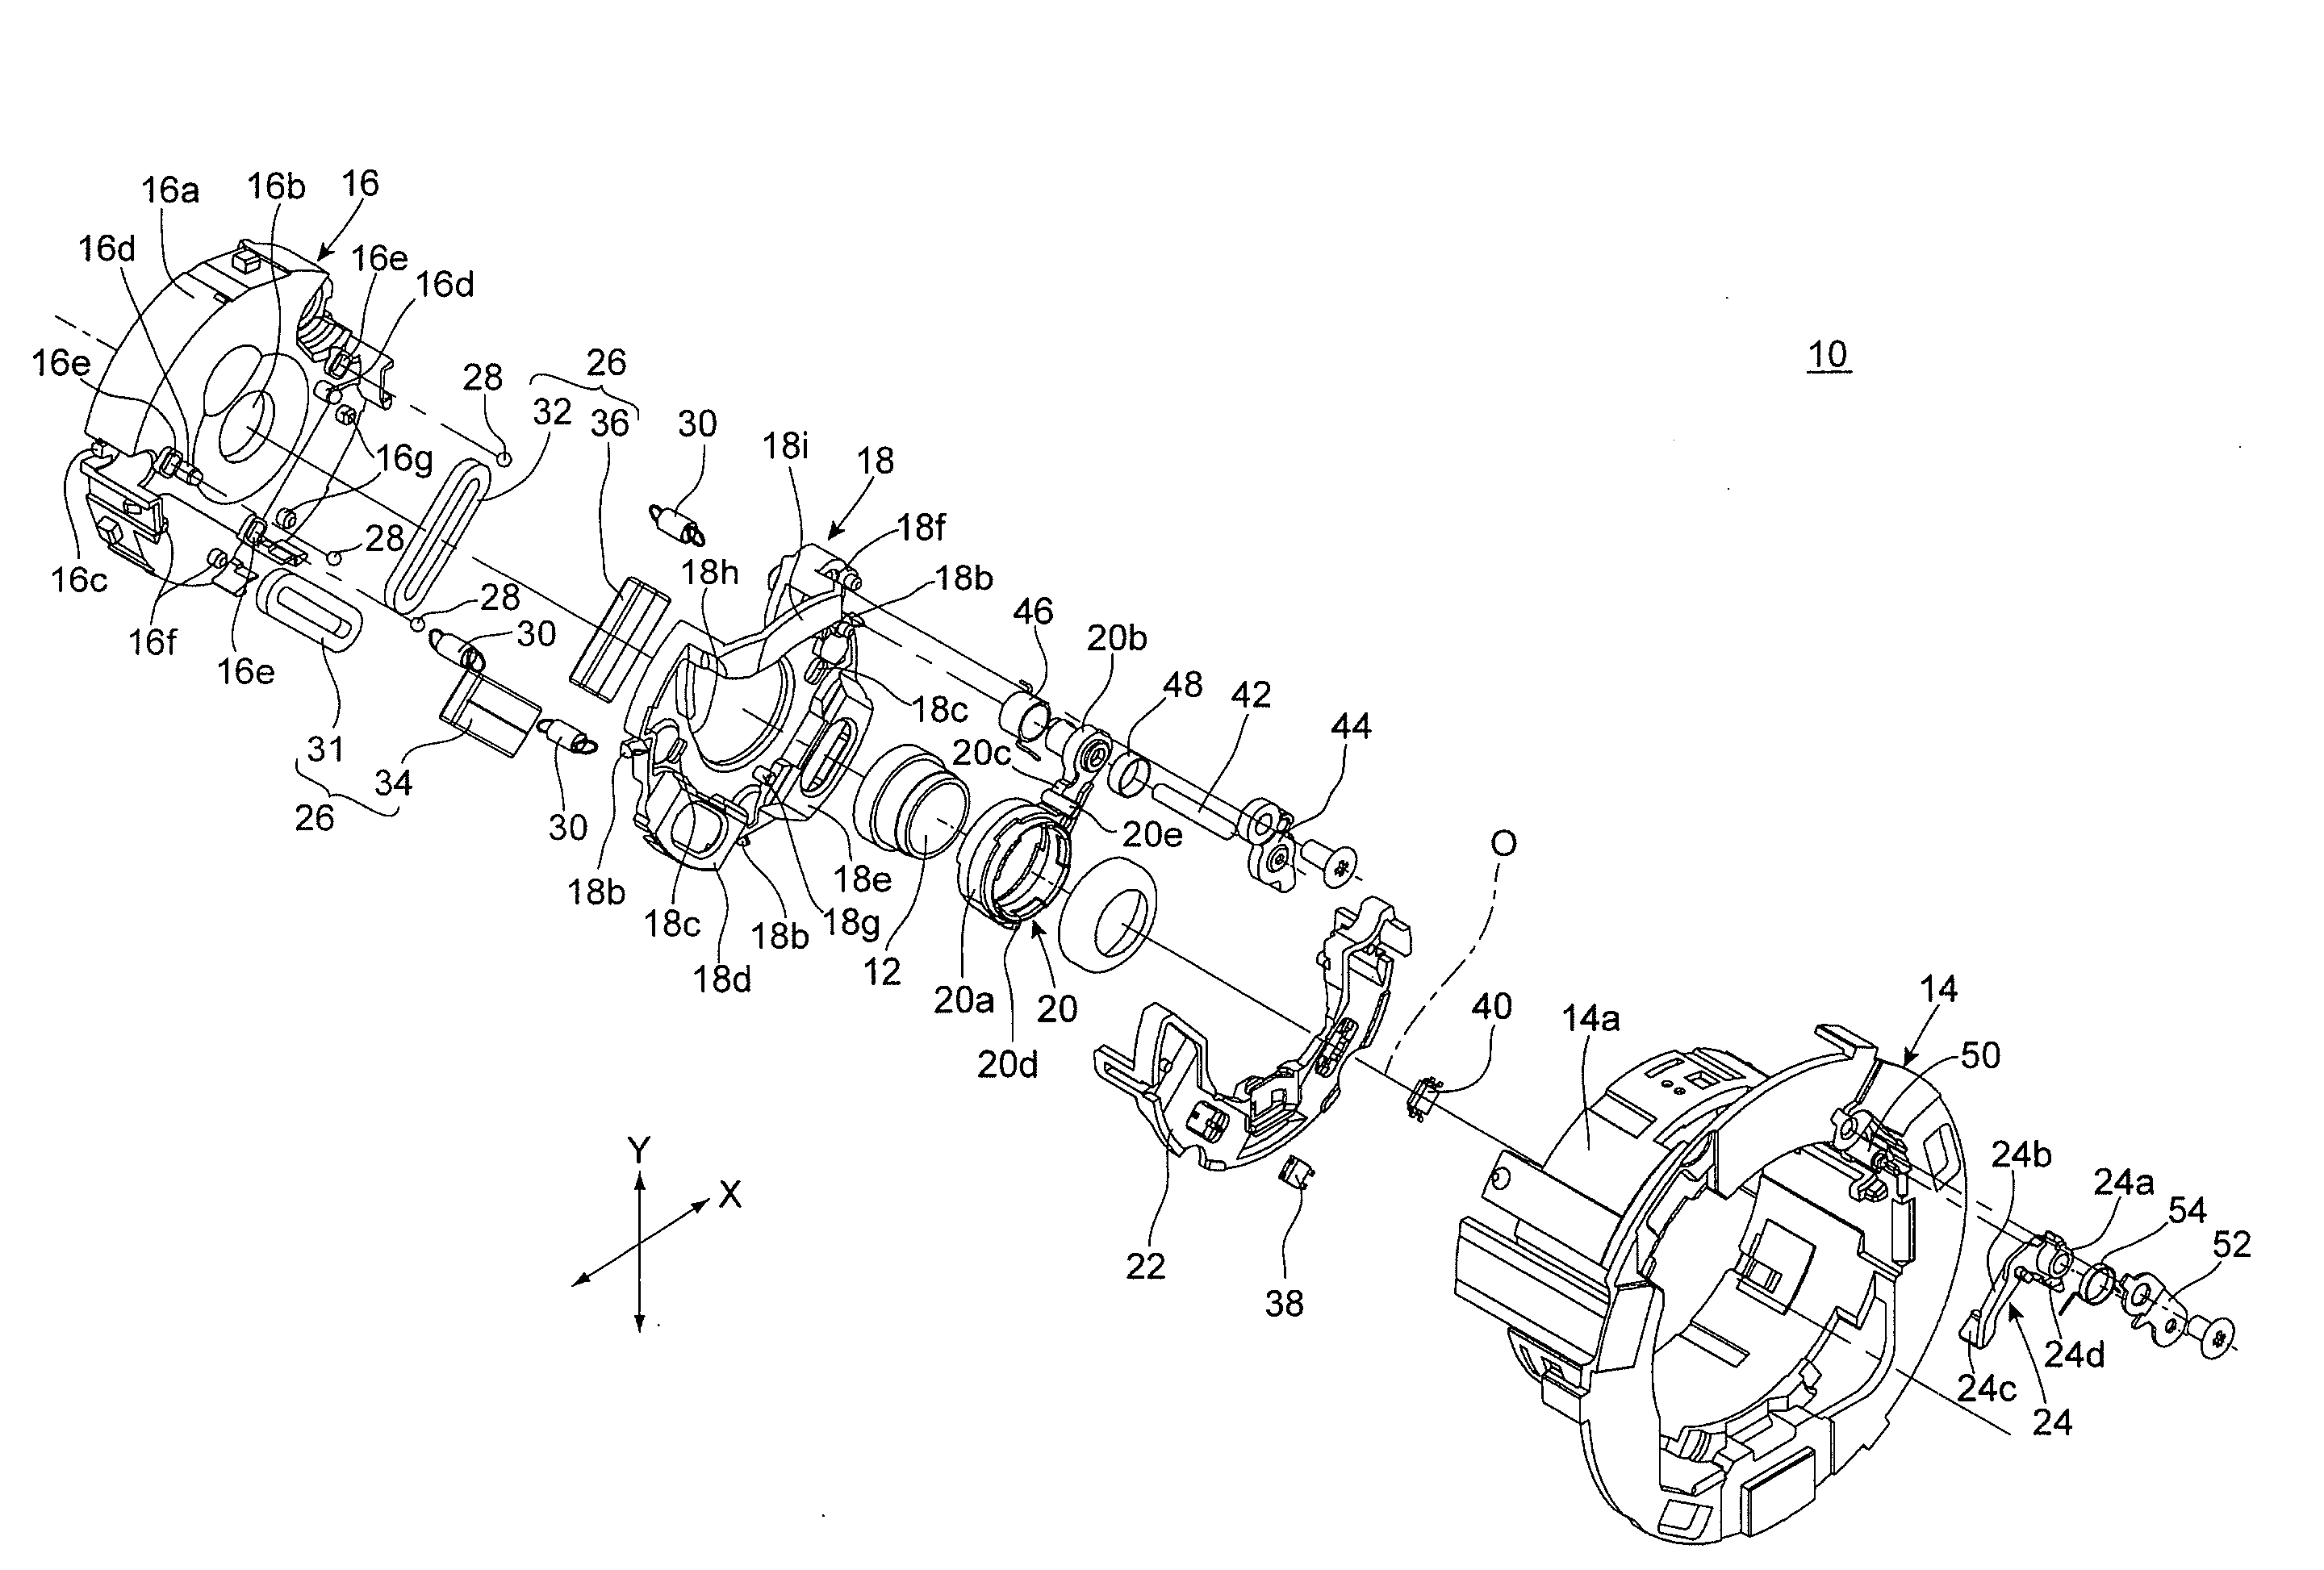 Position controller for removable optical element